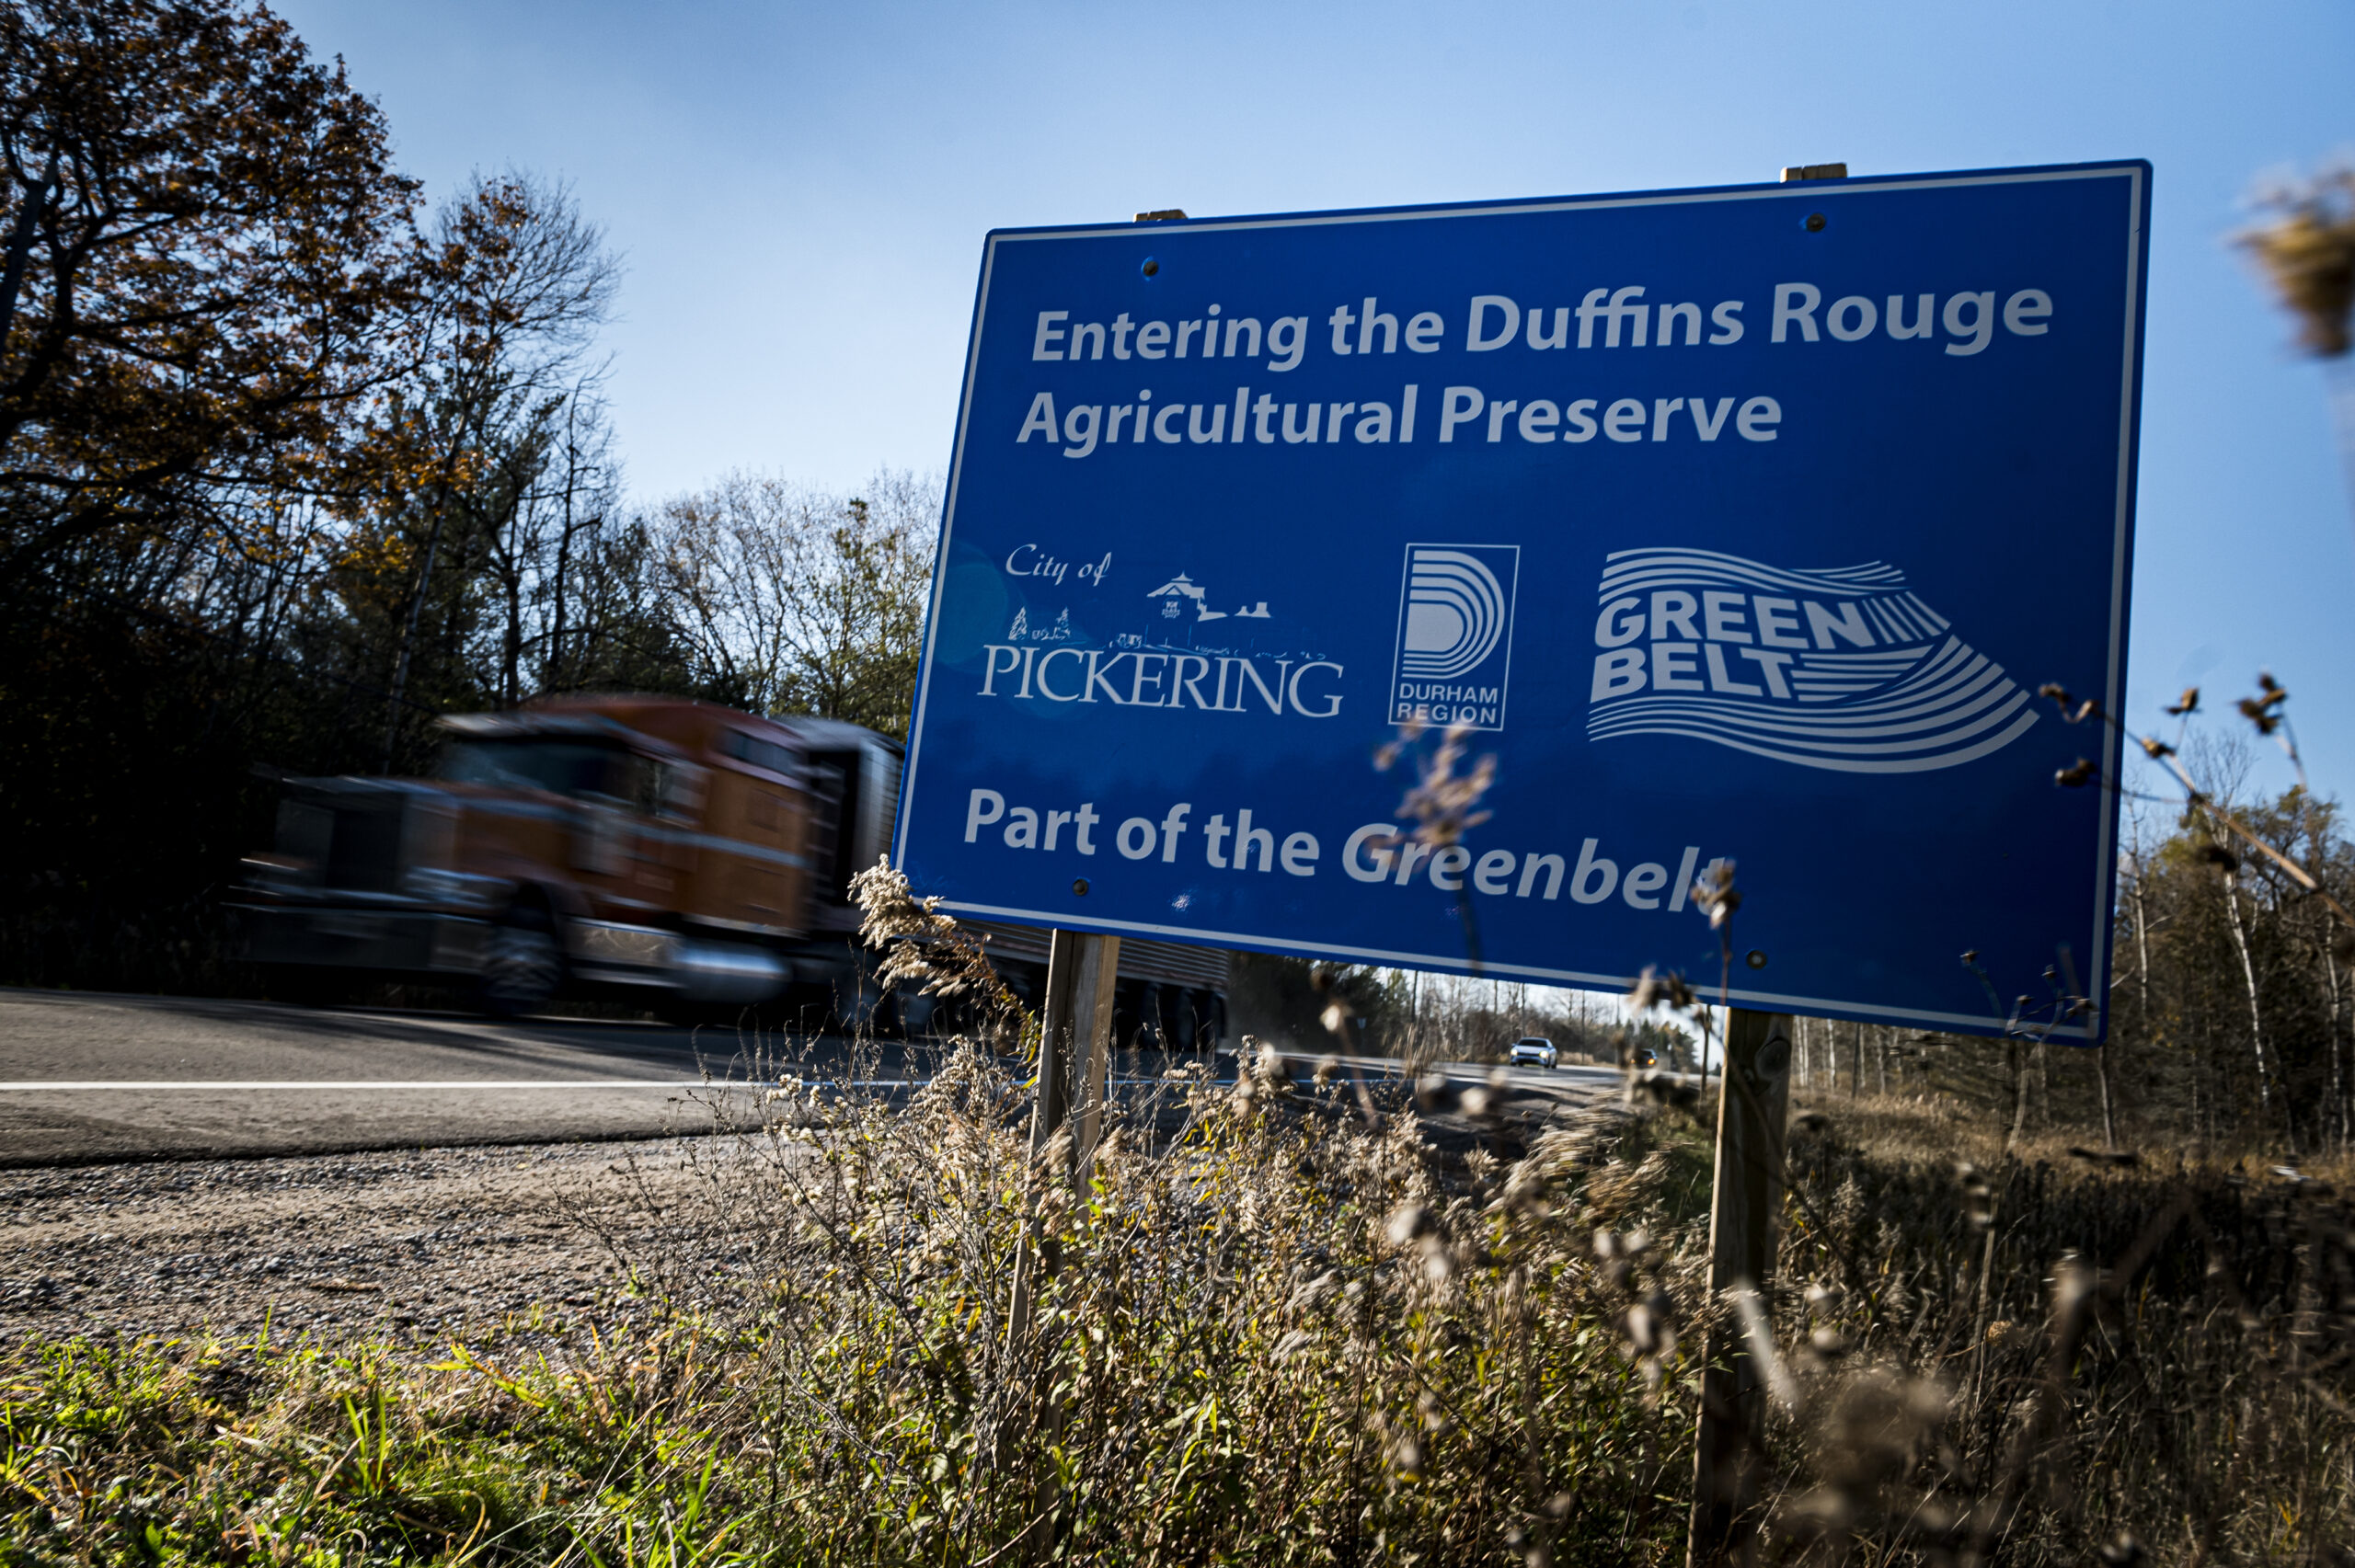 A sign describing passage into the Duffins Rouge Agricultural Preserve, in the Greenbelt